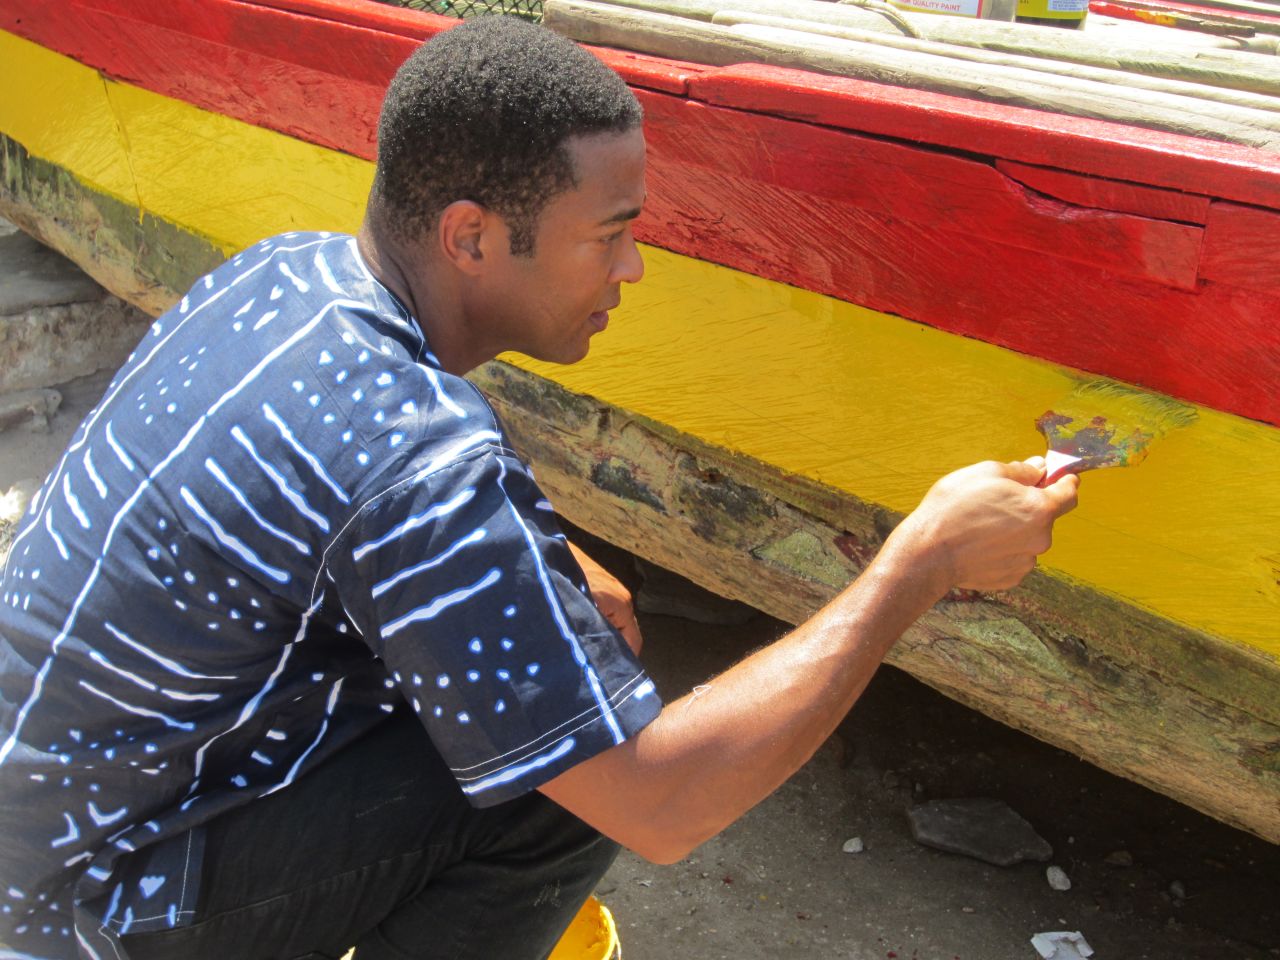 While visiting Elmina Beach, Lemon noticed an elderly fisherman painting his boat. He jumped in to help.  